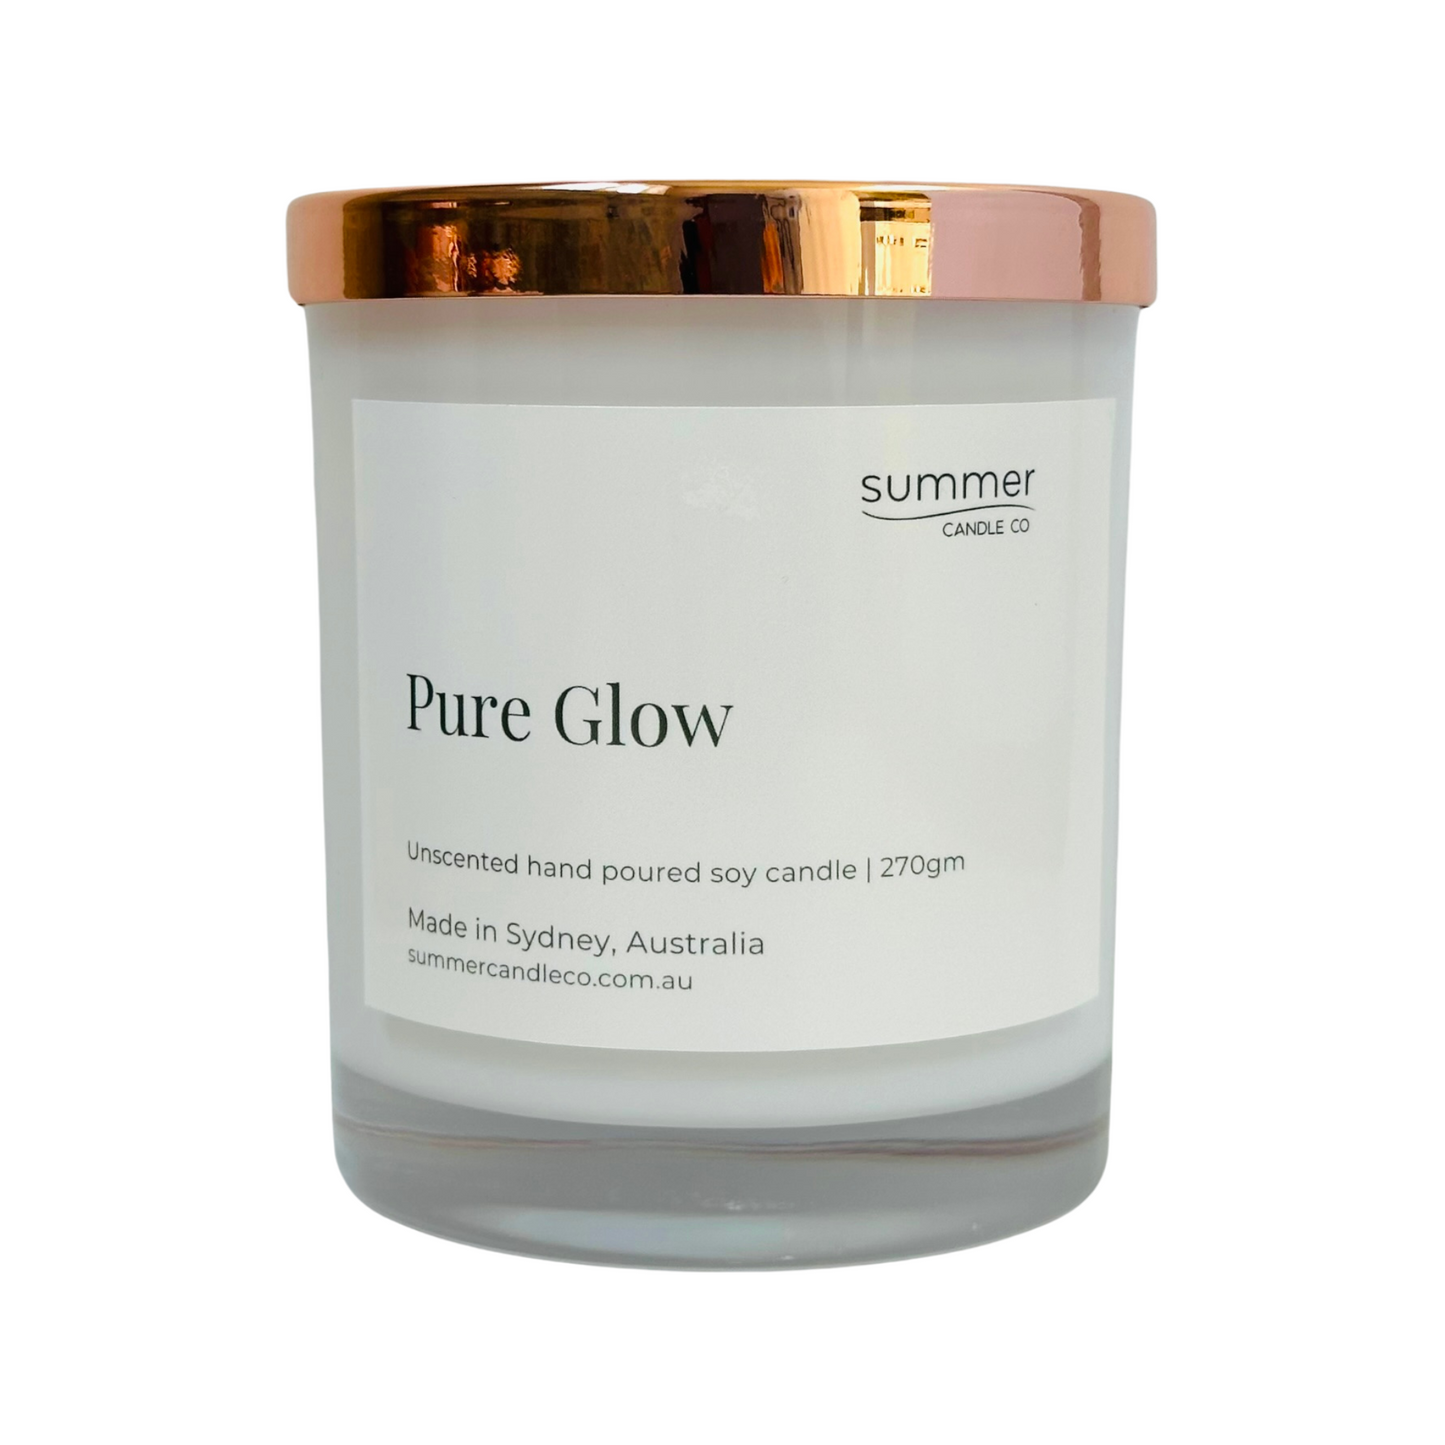 Lovely Hand Poured Soy Candle 270gram No Scented Fragrance called Pure Glow